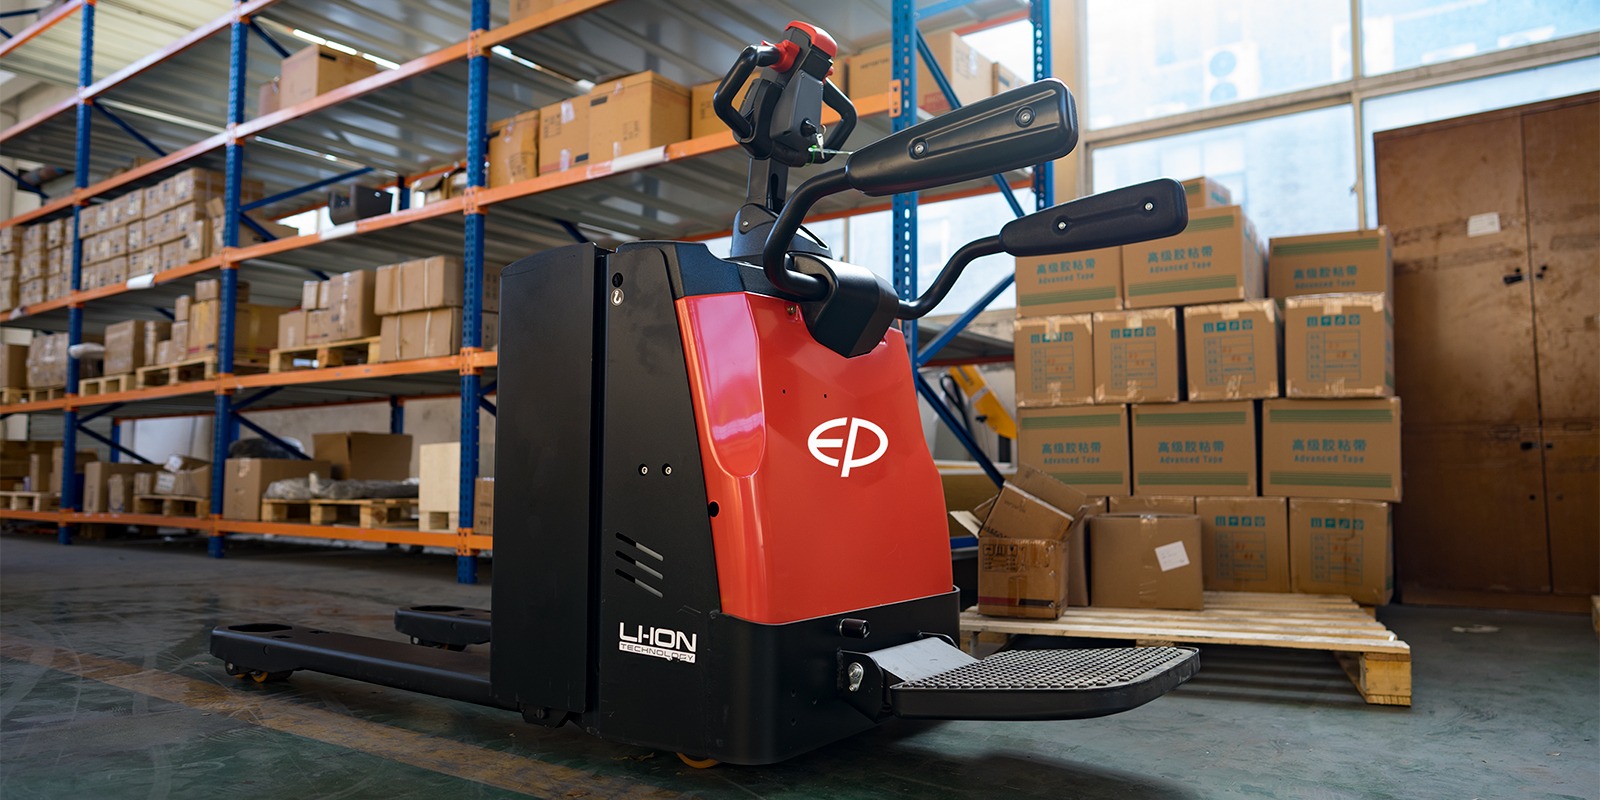  RPL series electric pallet truck being used in a warehouse.